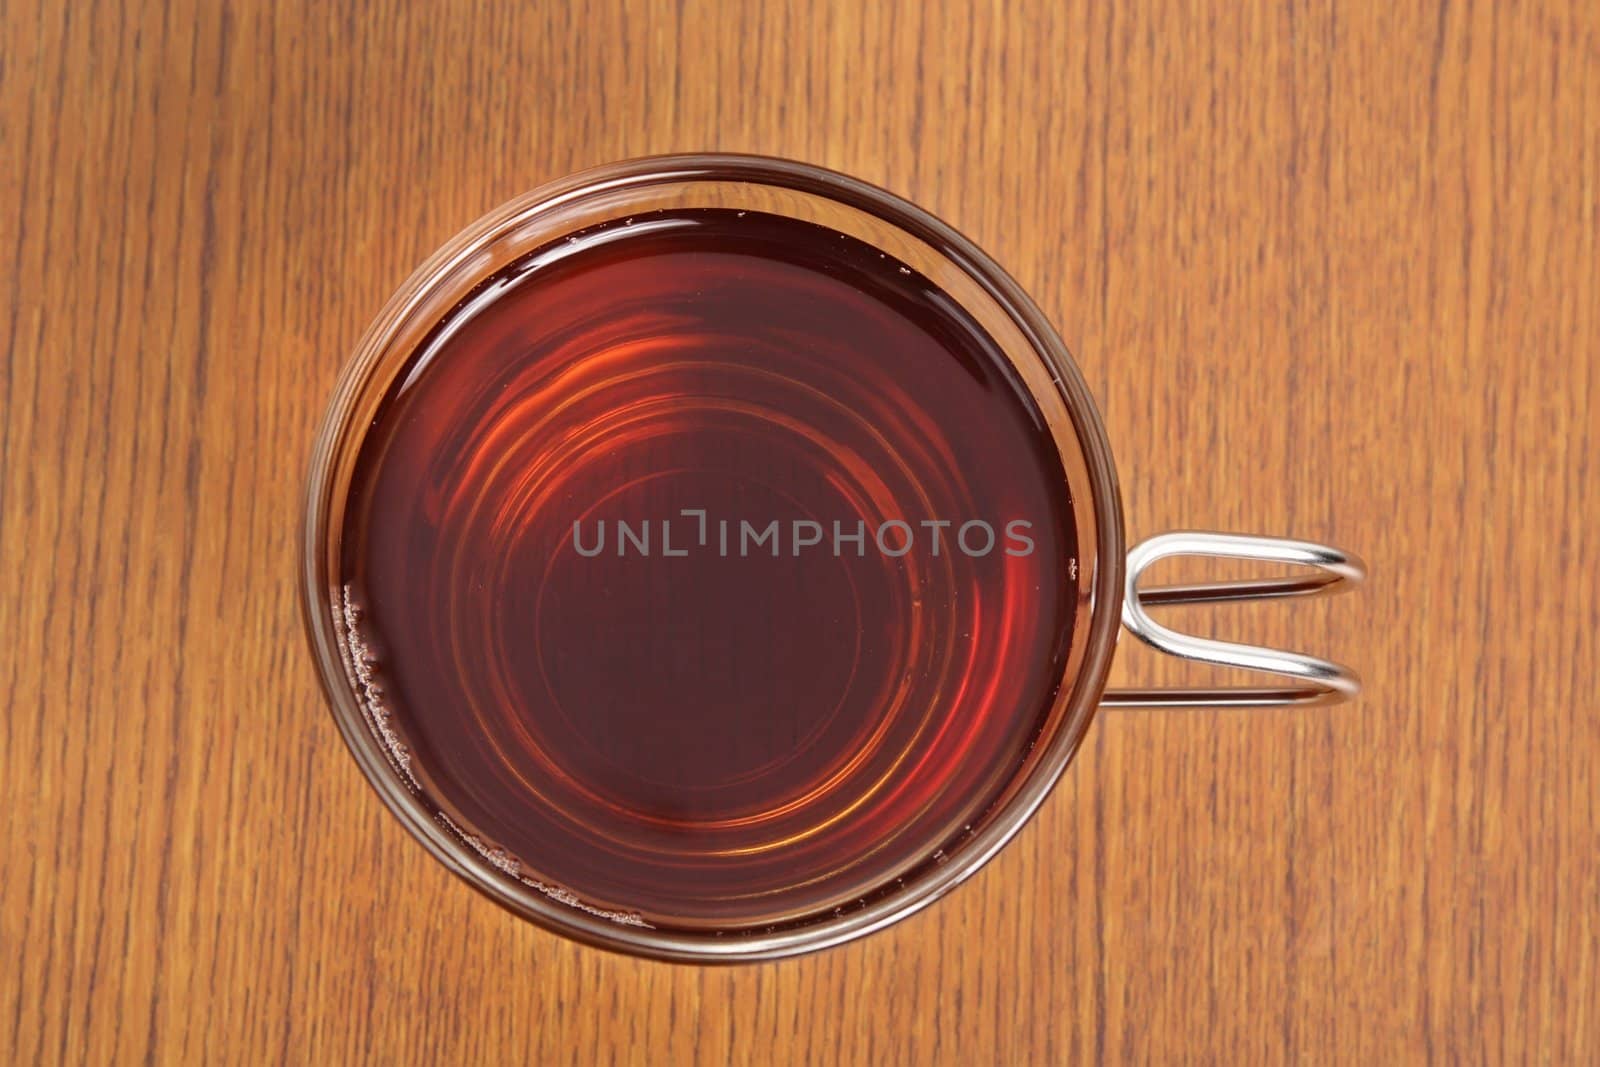 top view of a cup of tea, wood pattern background